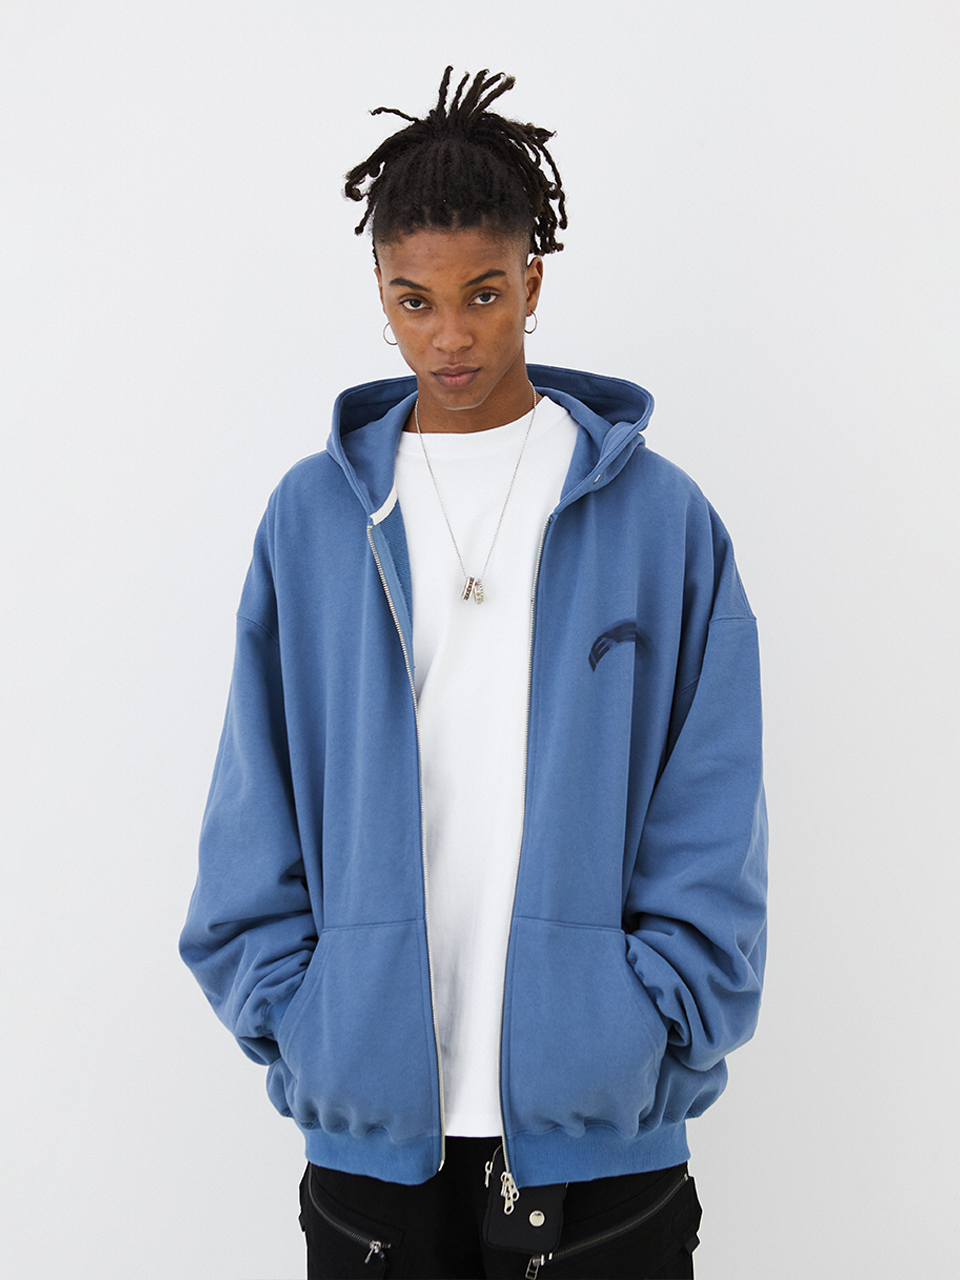 IEY - OVER MOTION LOGO HOODIE ZIP-UP Blue